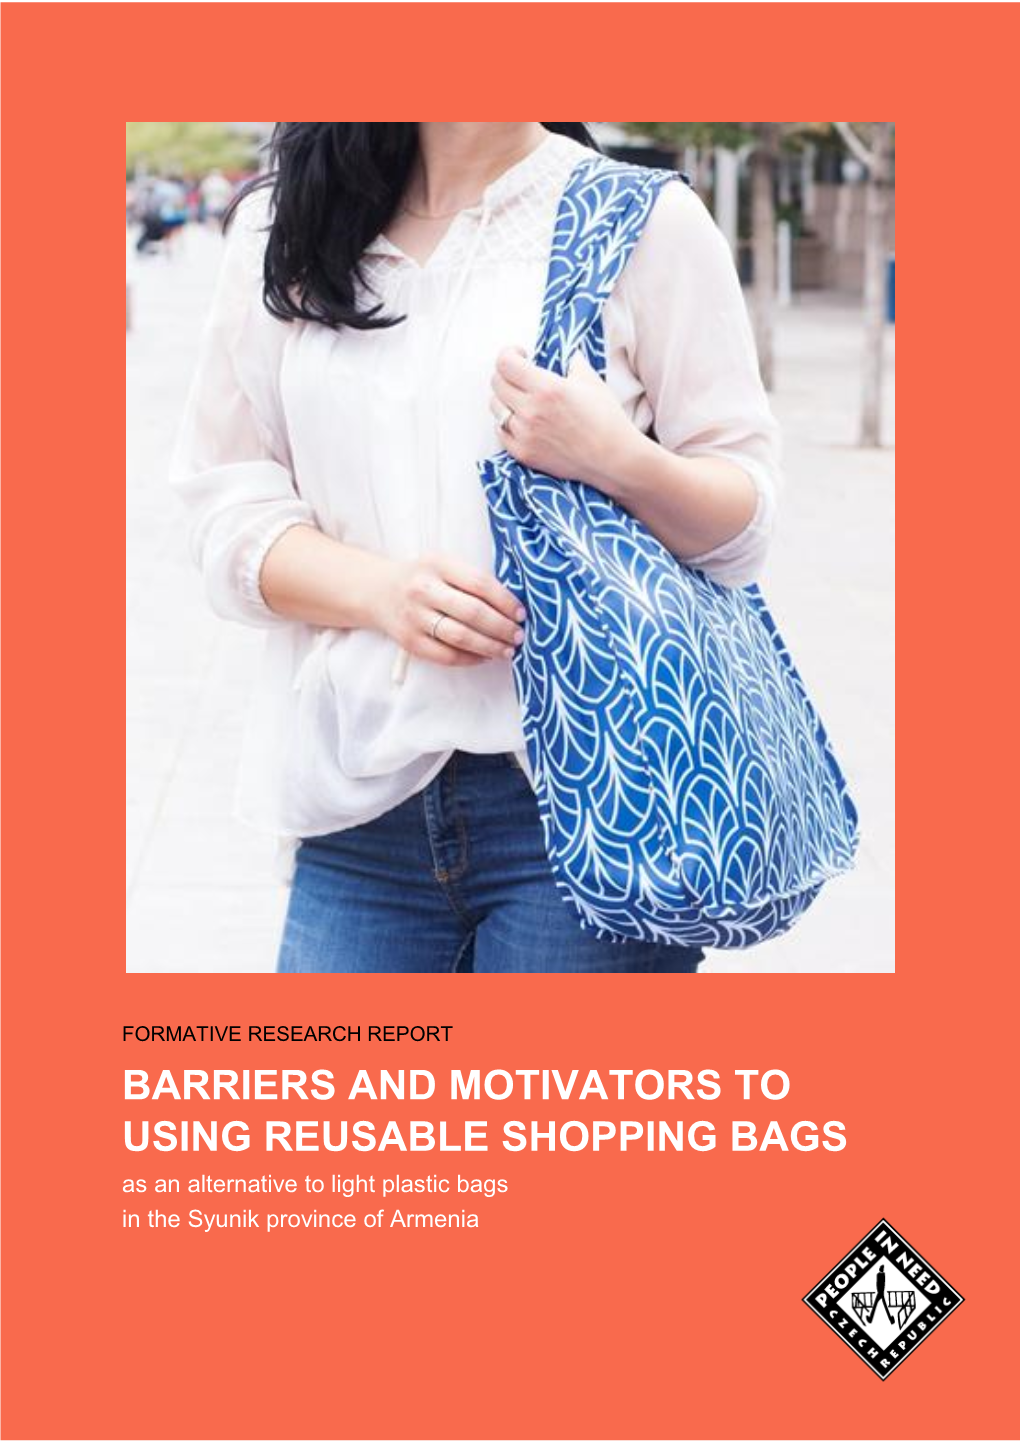 BARRIERS and MOTIVATORS to USING REUSABLE SHOPPING BAGS As an Alternative to Light Plastic Bags in the Syunik Province of Armenia